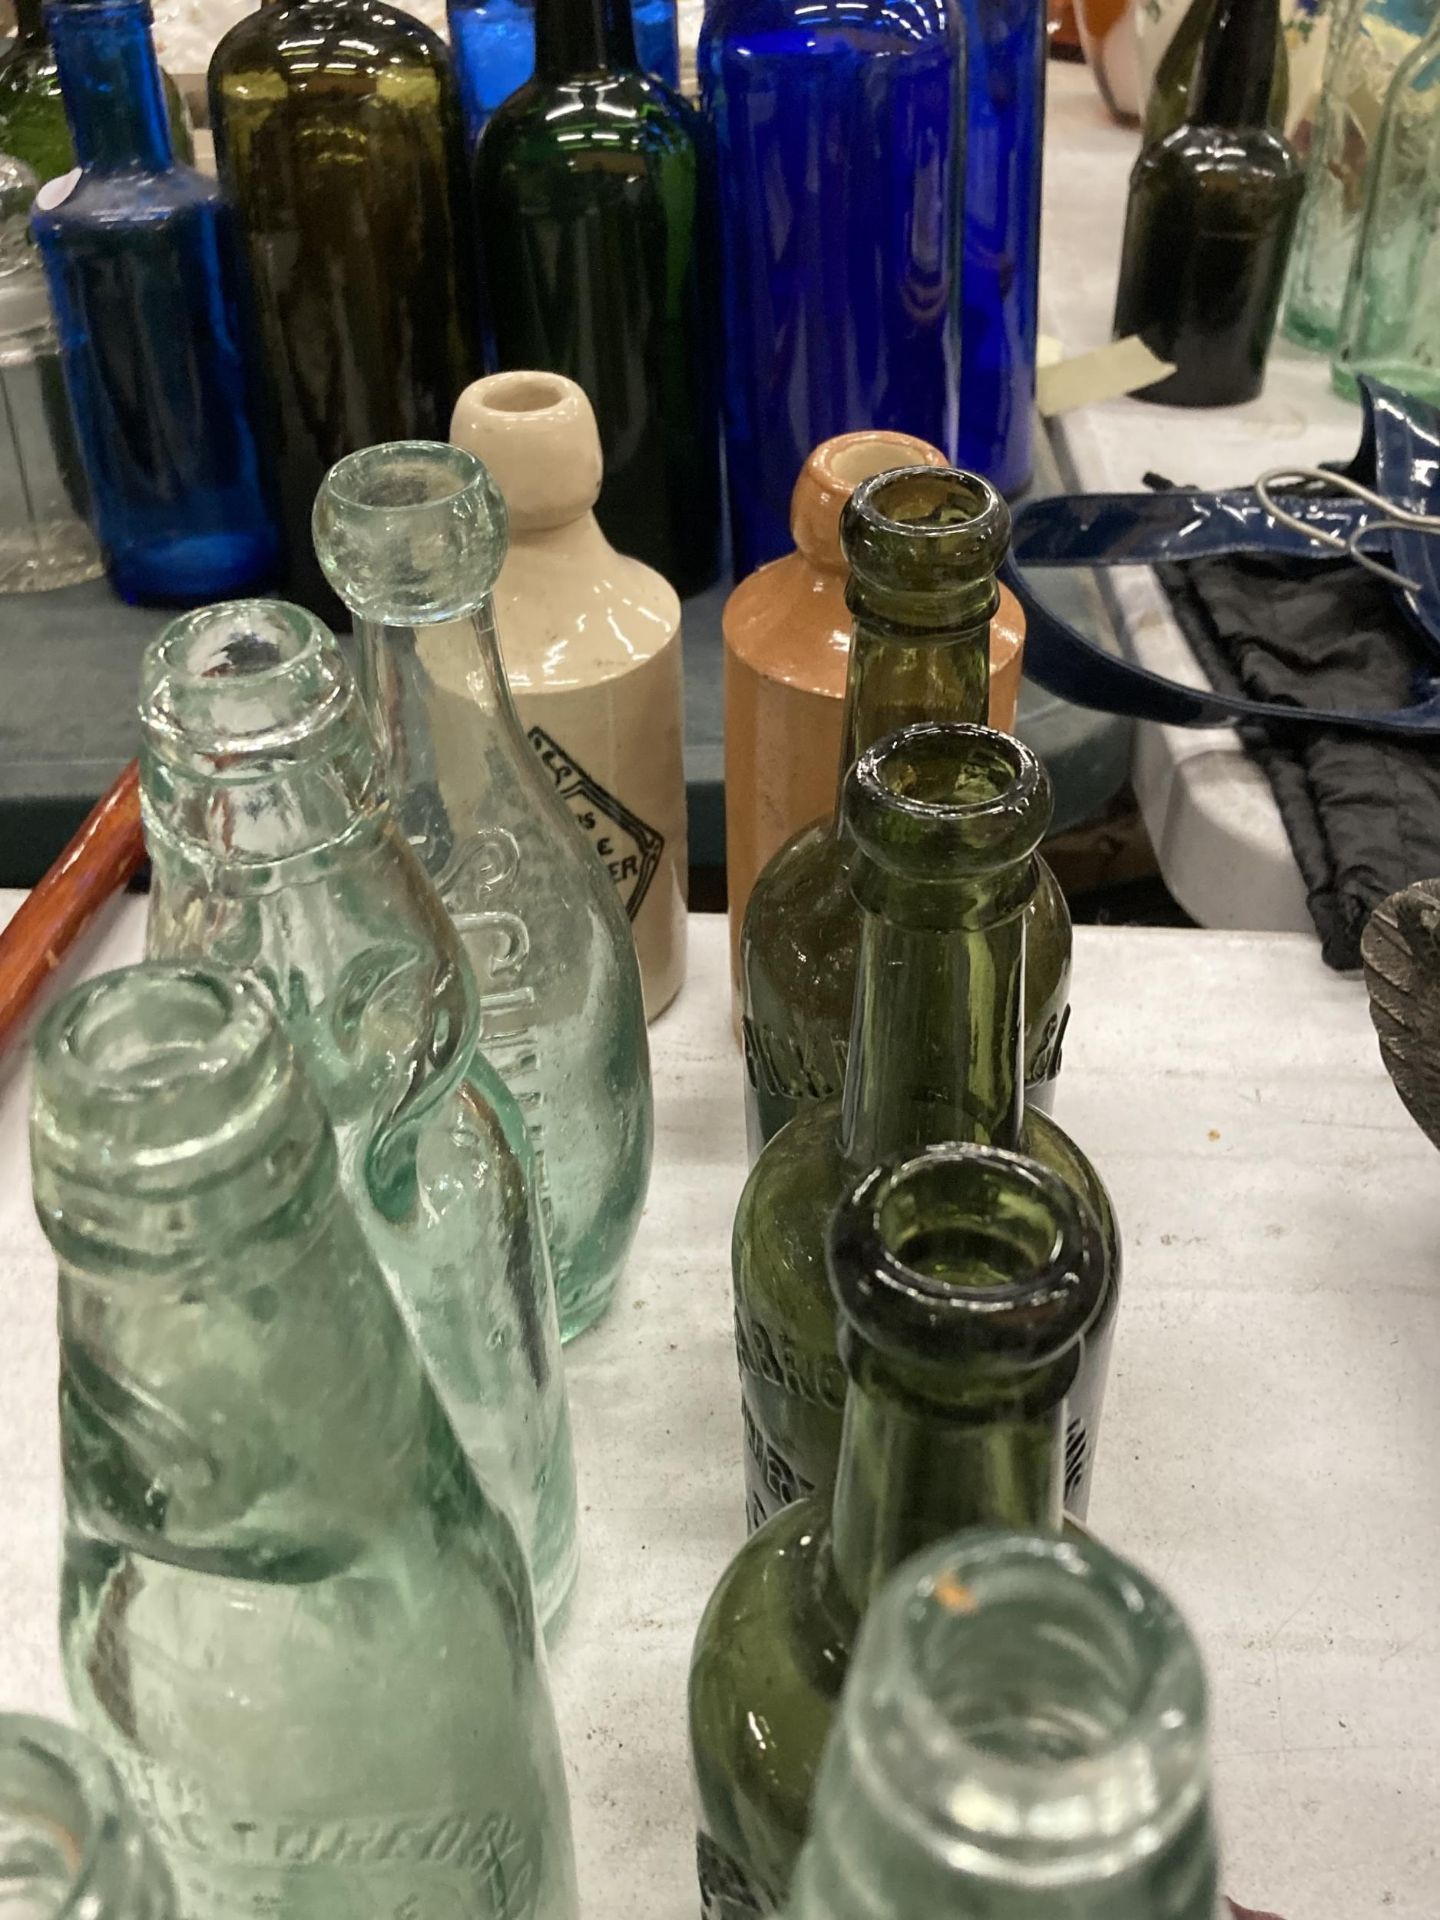 A COLLECTION OF VINTAGE GLASS BOTTLES WITH ADVERTISING ON THEM PLUS TWO STONE ONES - Image 4 of 4